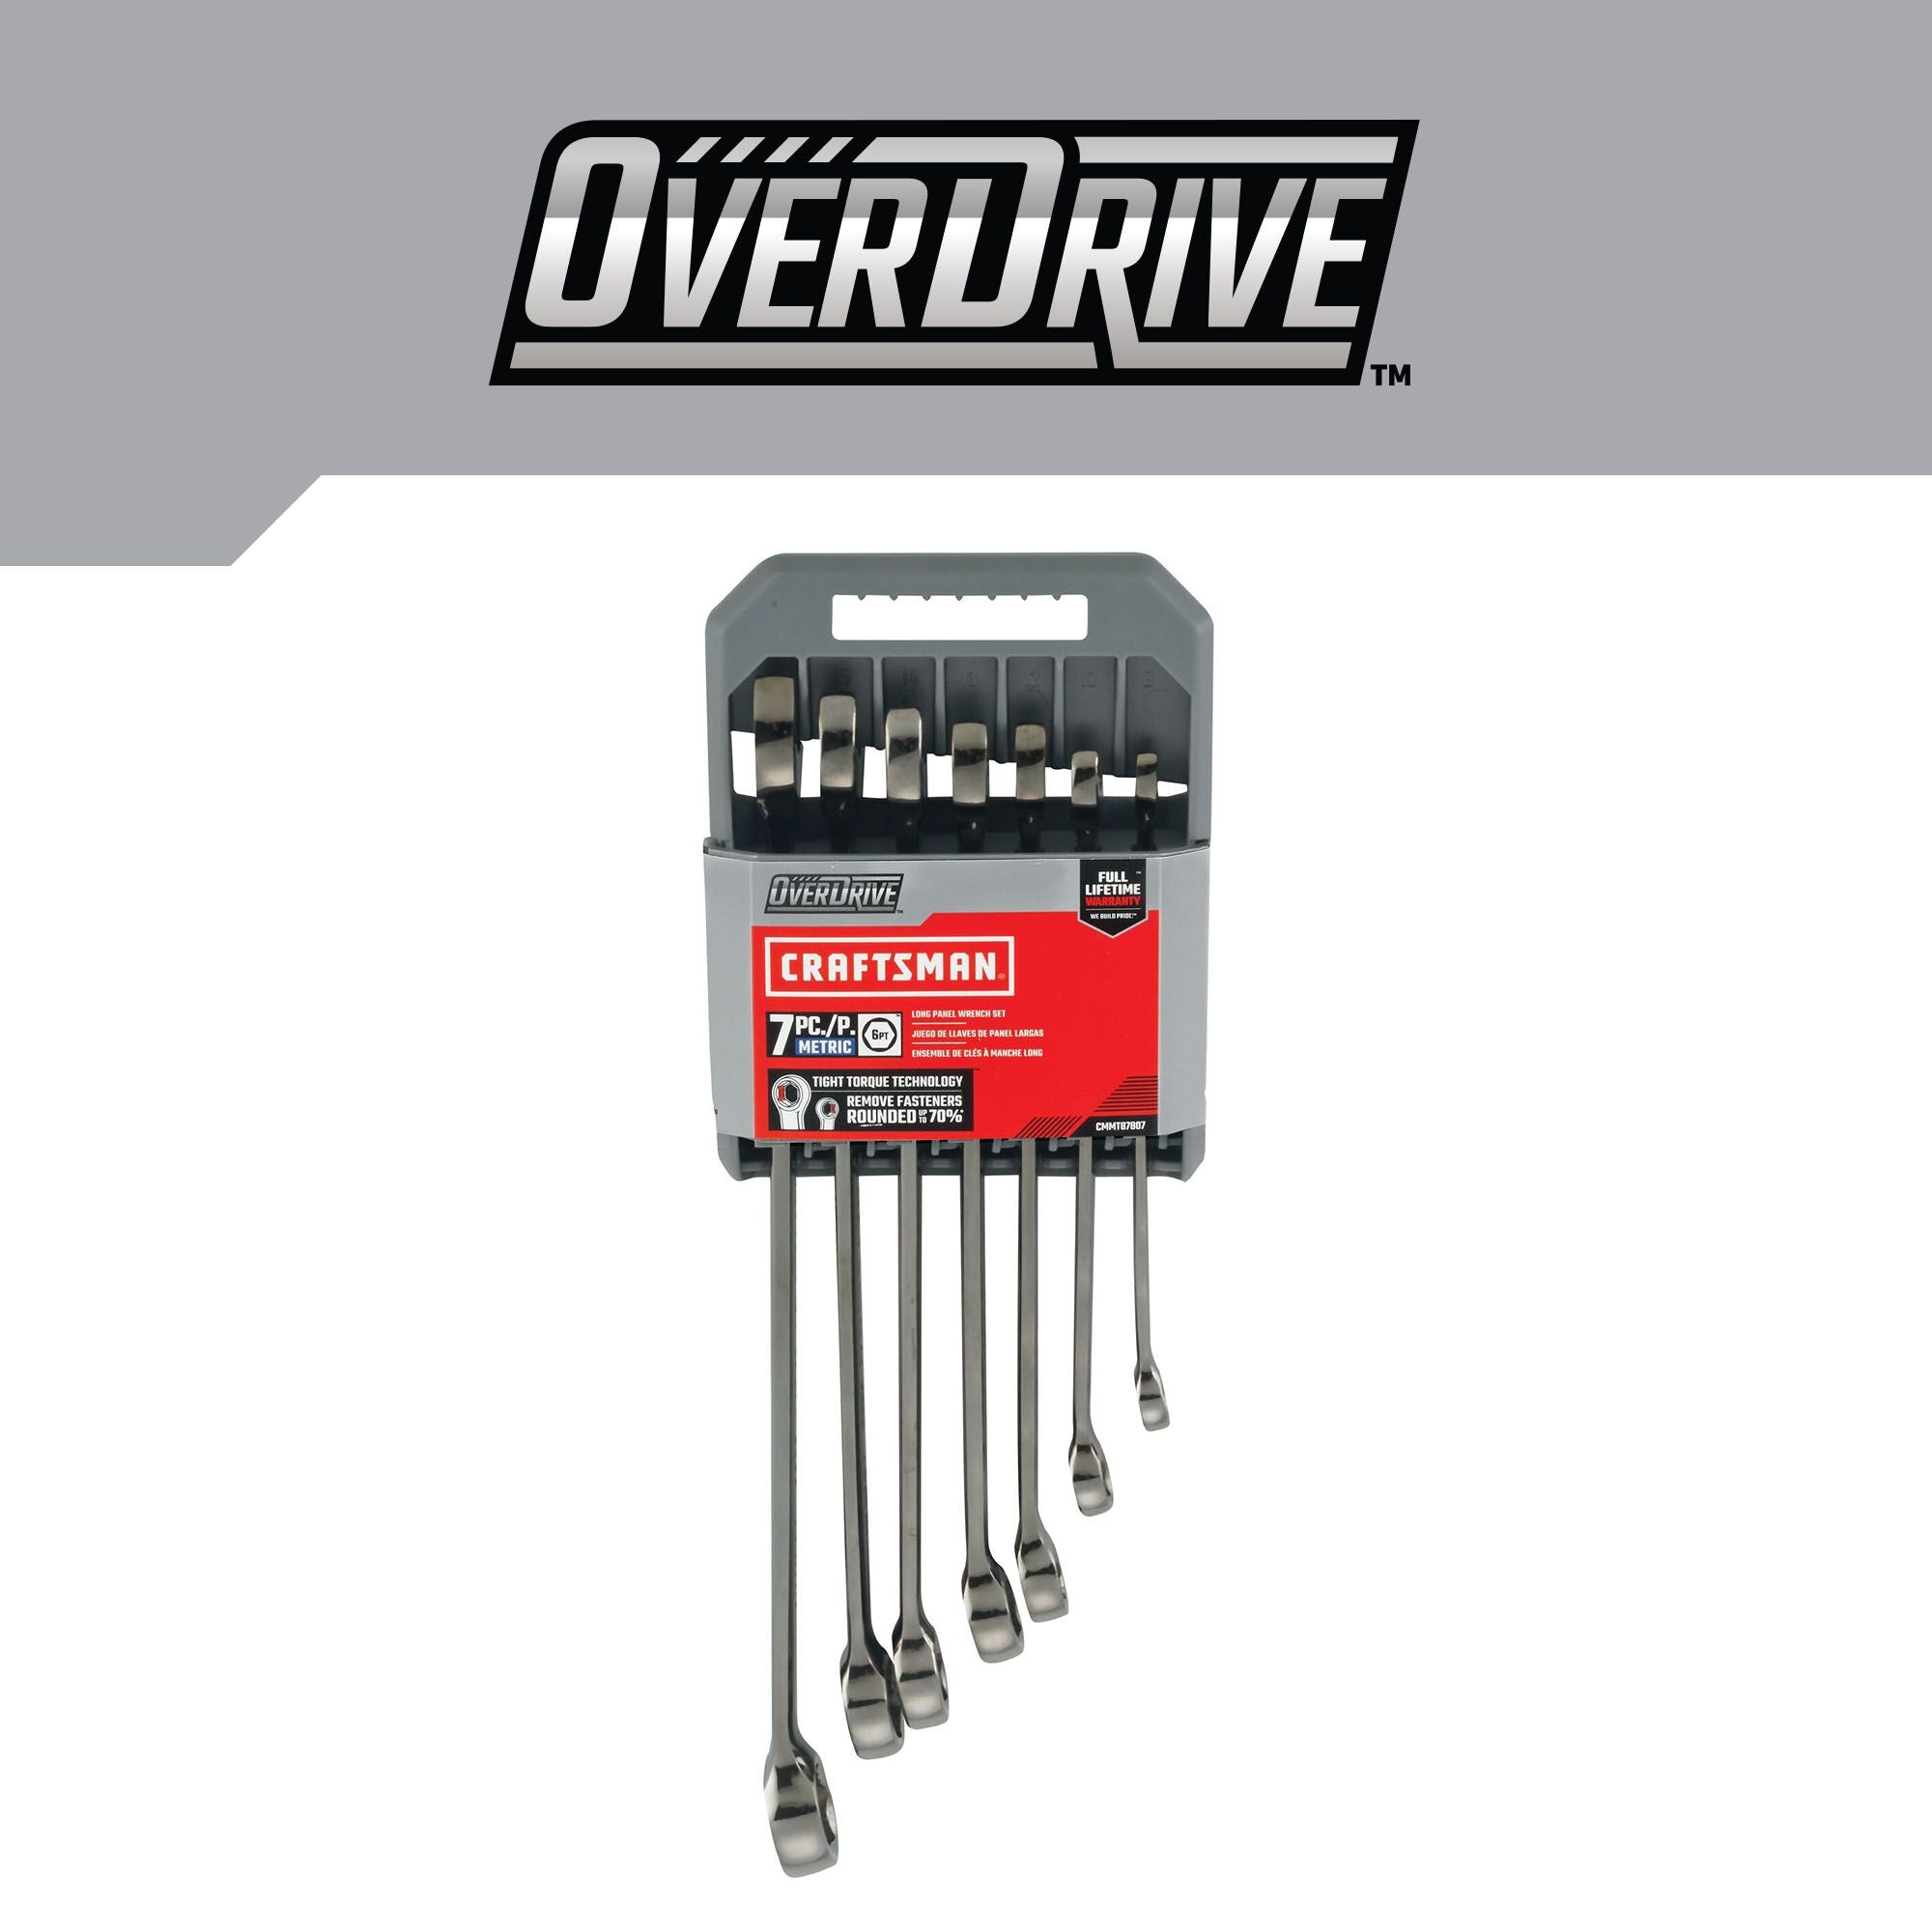 CRAFTSMAN OVERDRIVE 7 PIECE WRENCH SET in case